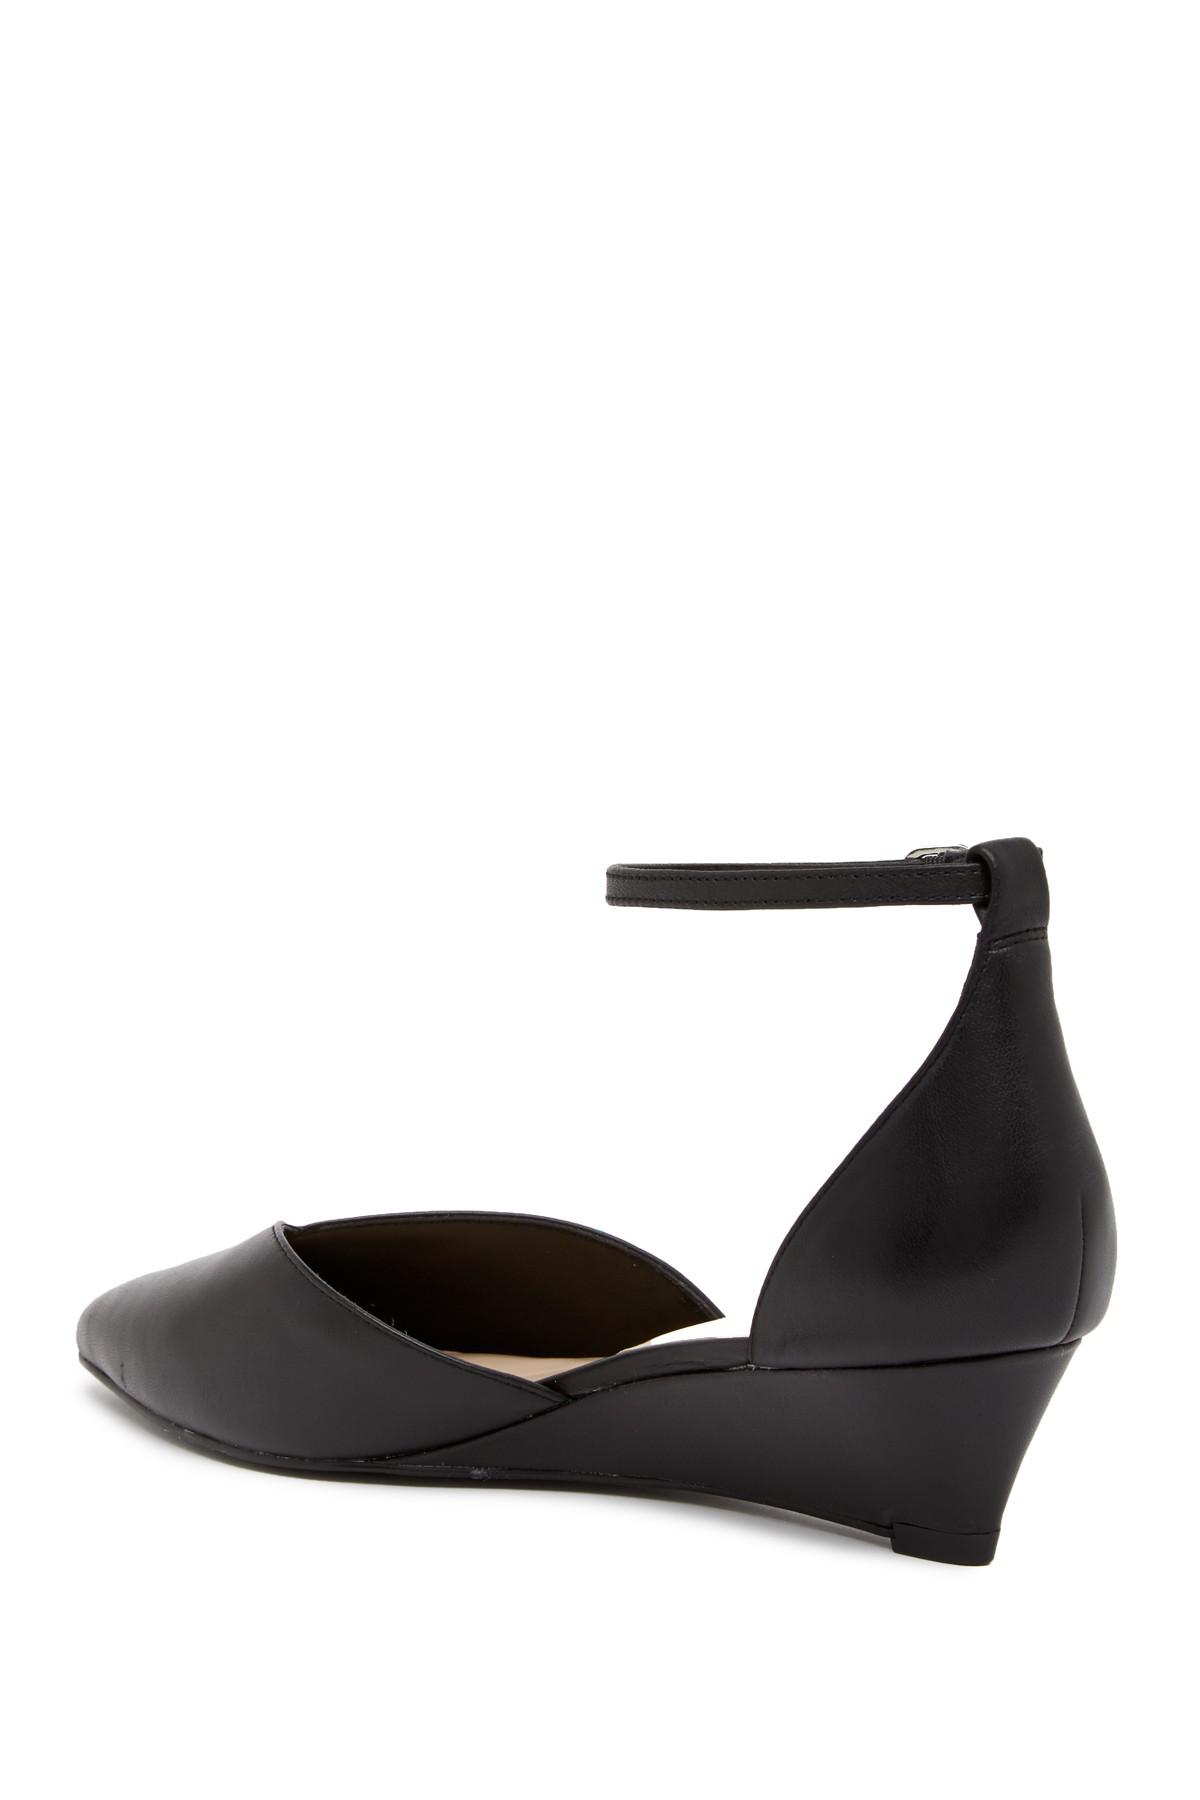 Nine West Evenhim Leather Pointed Toe Wedge Pump - Wide Width Available in  Black | Lyst